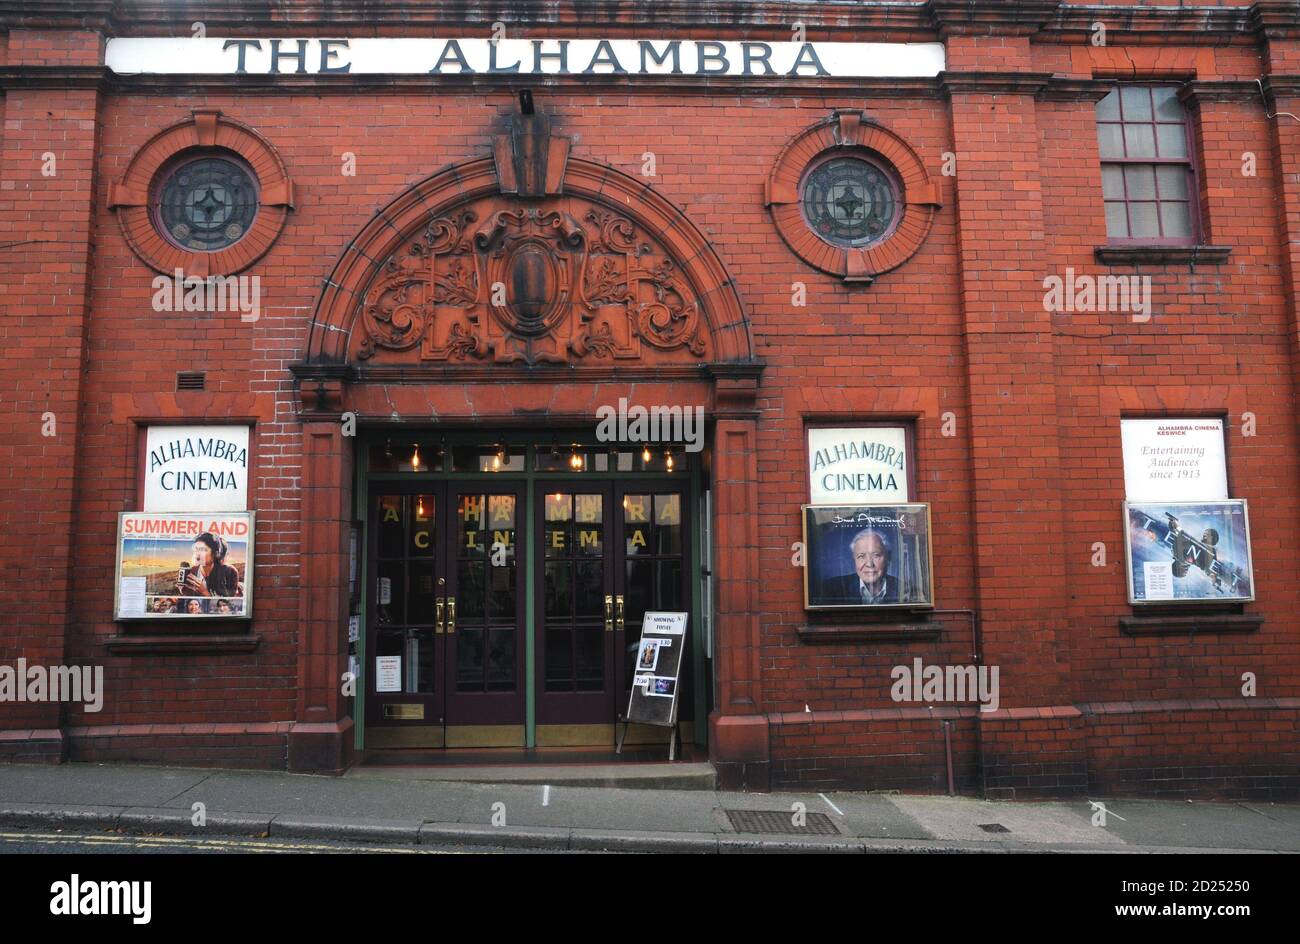 The Alhambra Cinema in the Cumbrian market town of Keswick. Built in 1913 and opened on 22nd Jan 2014, it has been in operation for over 100 years! Stock Photo